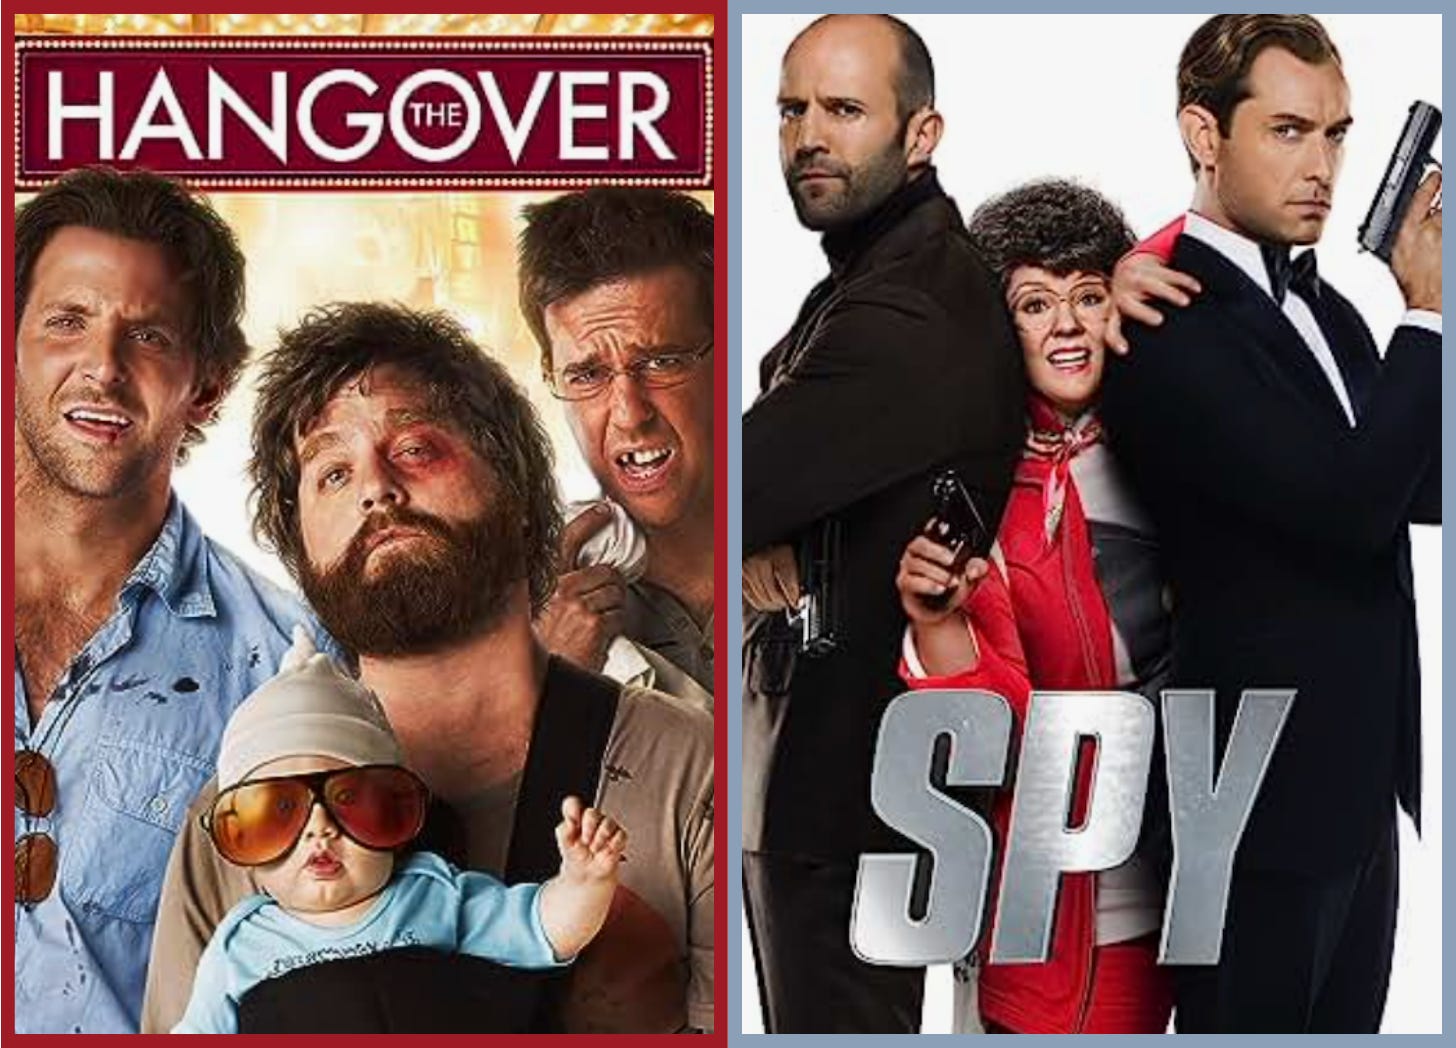 Hangover and Spy movie posters